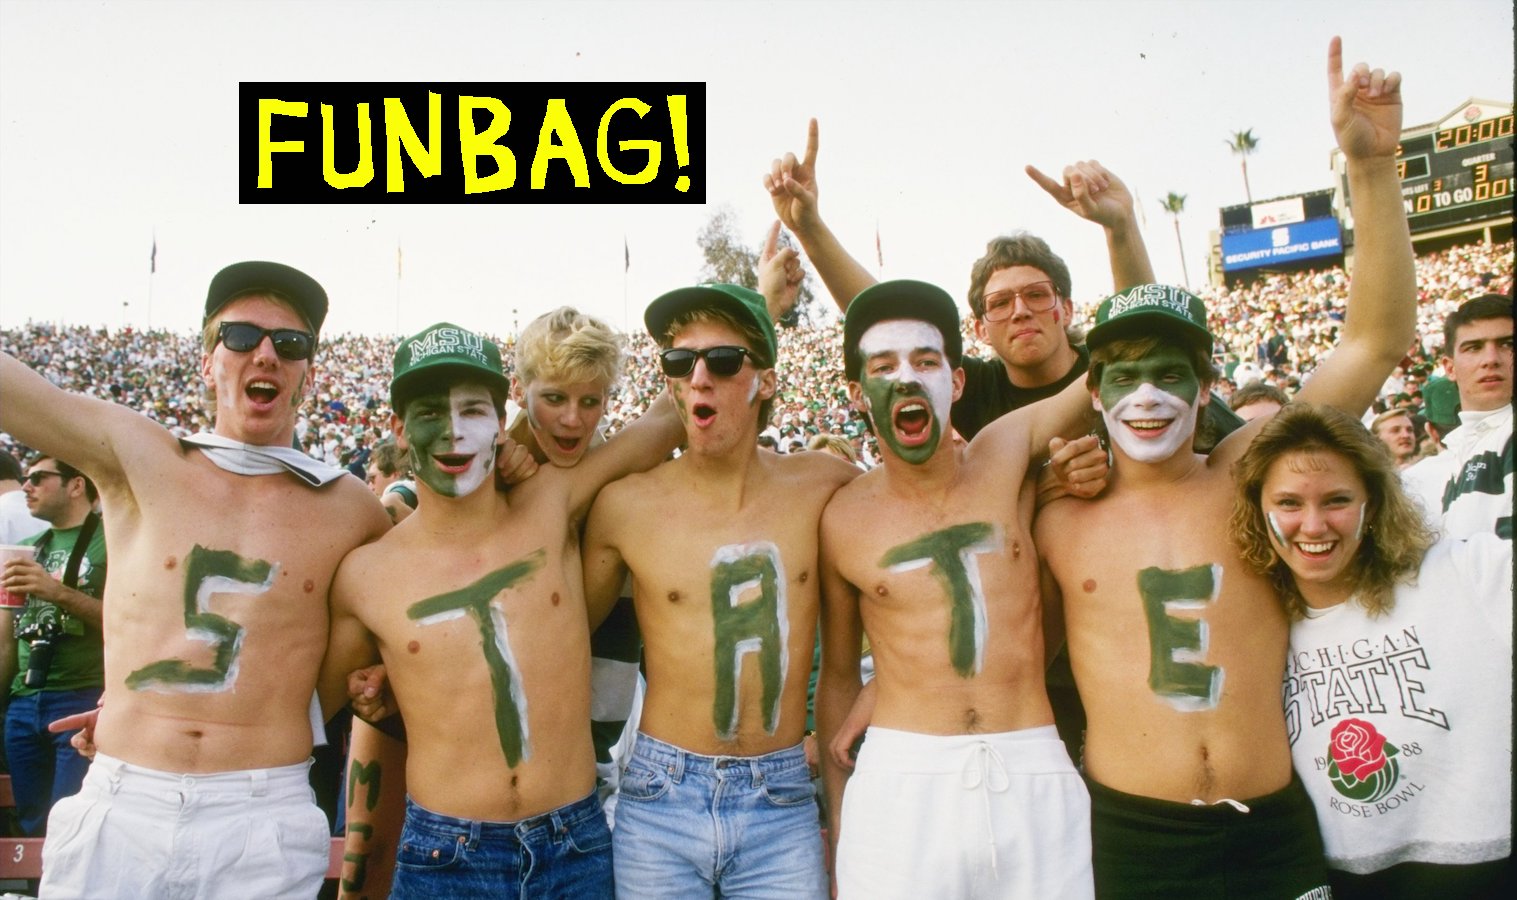 Fans of the Michigan State Spartans write ''state'' on their chests during a game against the Southern California Trojans at the Rose in Pasadena, California. Michigan State won the game 20-17.